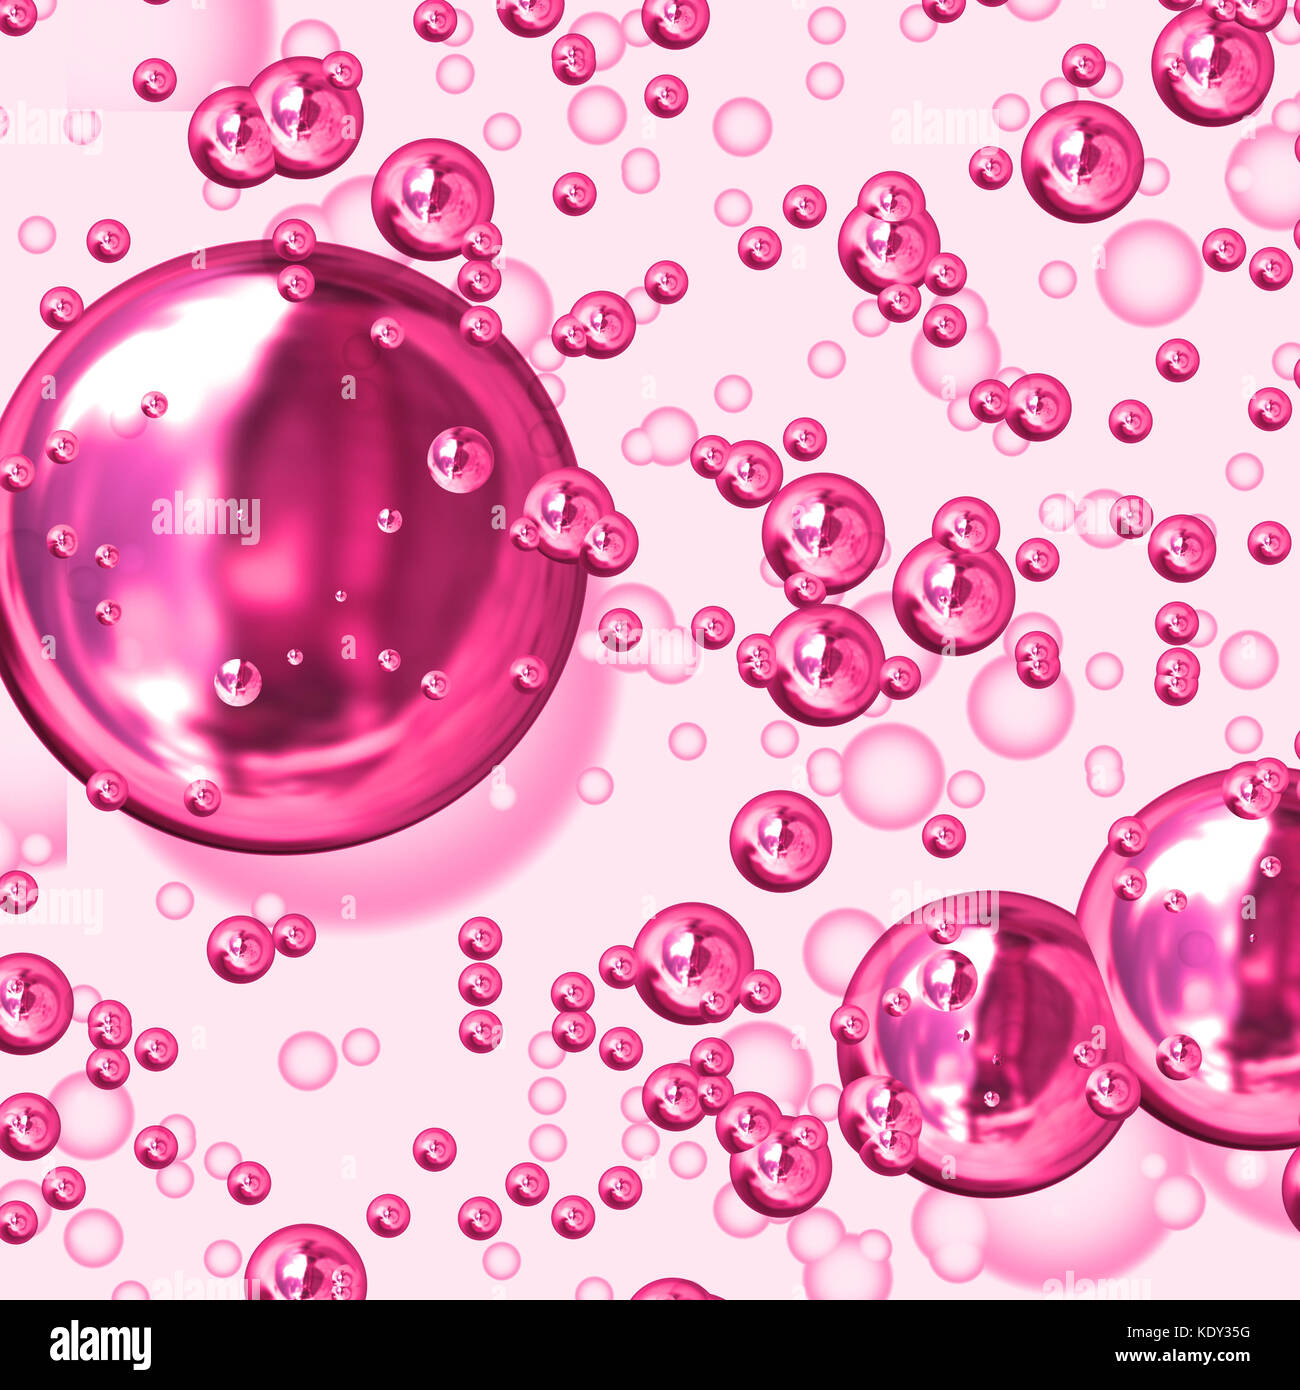 Abstract background from floating pink bubbles Stock Photo - Alamy